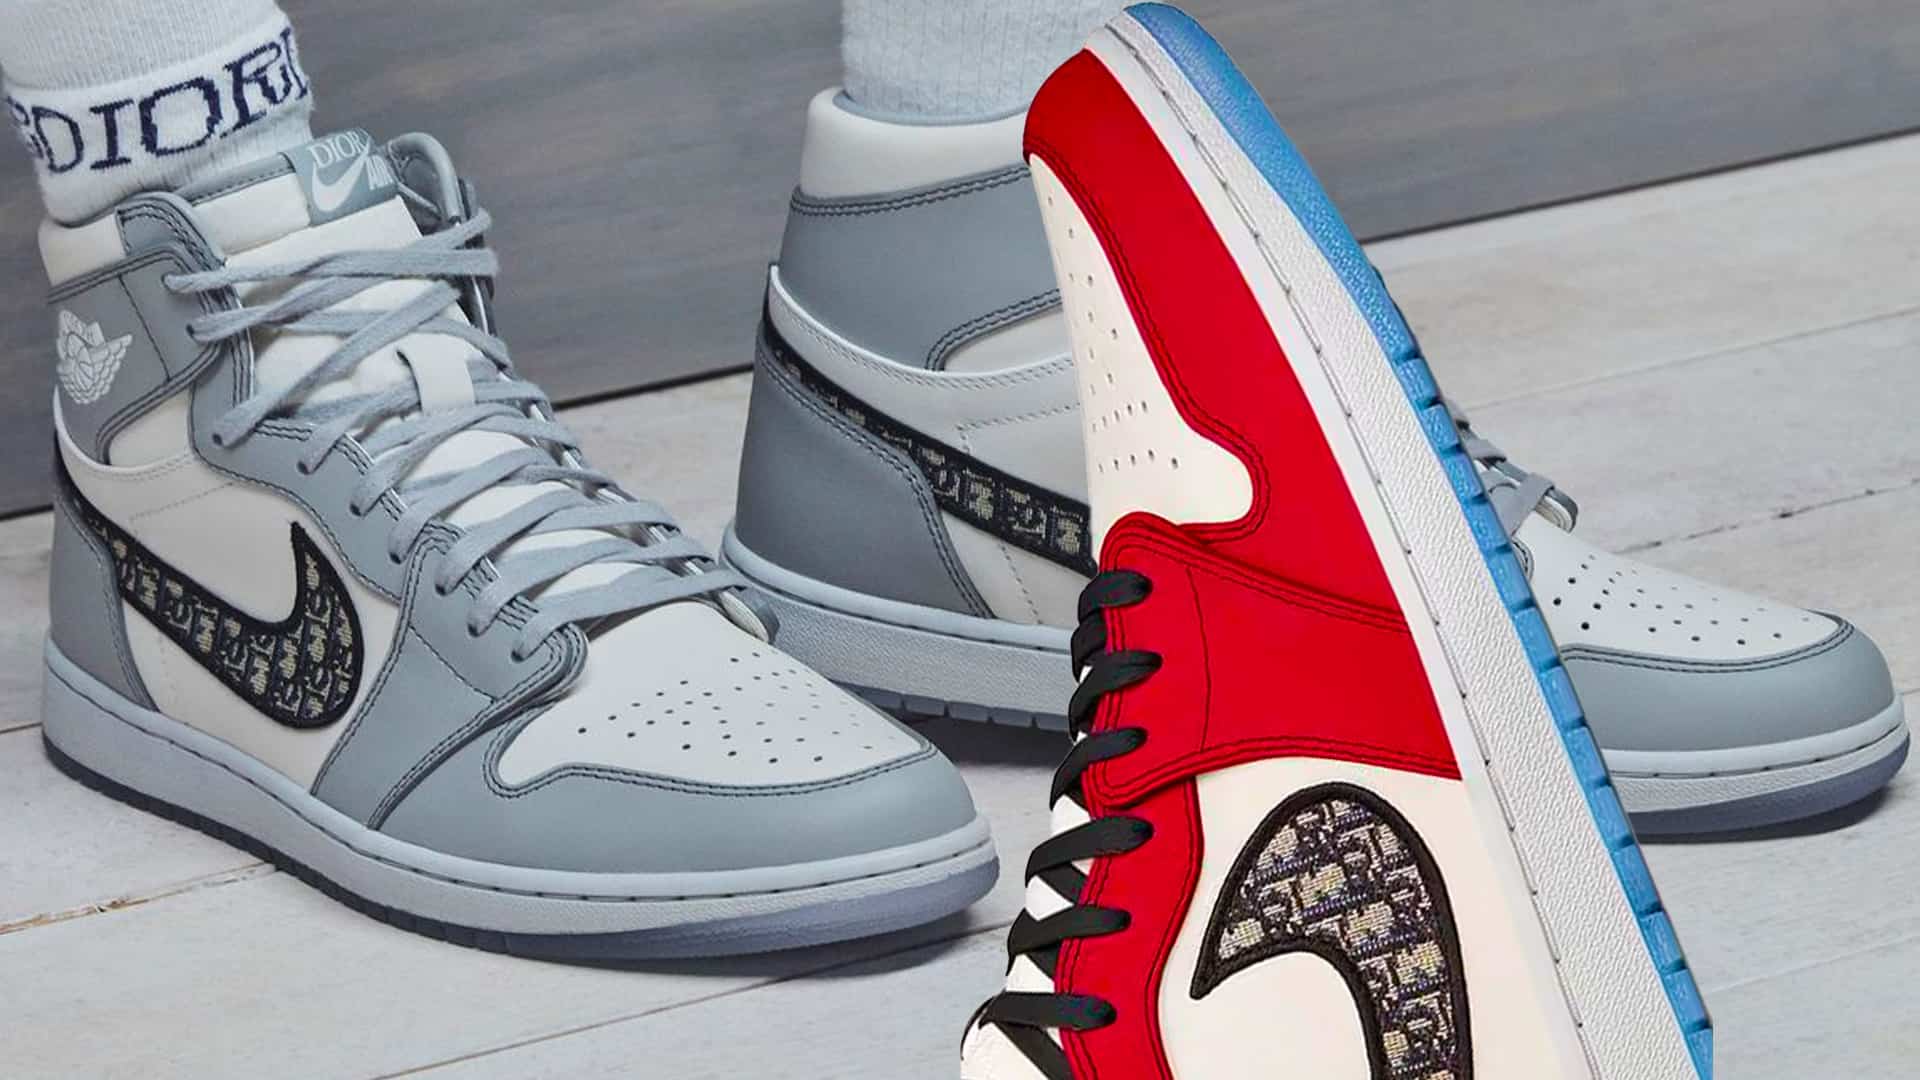 Big World Magazine  Dior Air Jordan 1 Could Receive Chicago  Royal  Colorways Some iconic colorways are rumored to be coming to the Dior Air Jordan  1 One of the most